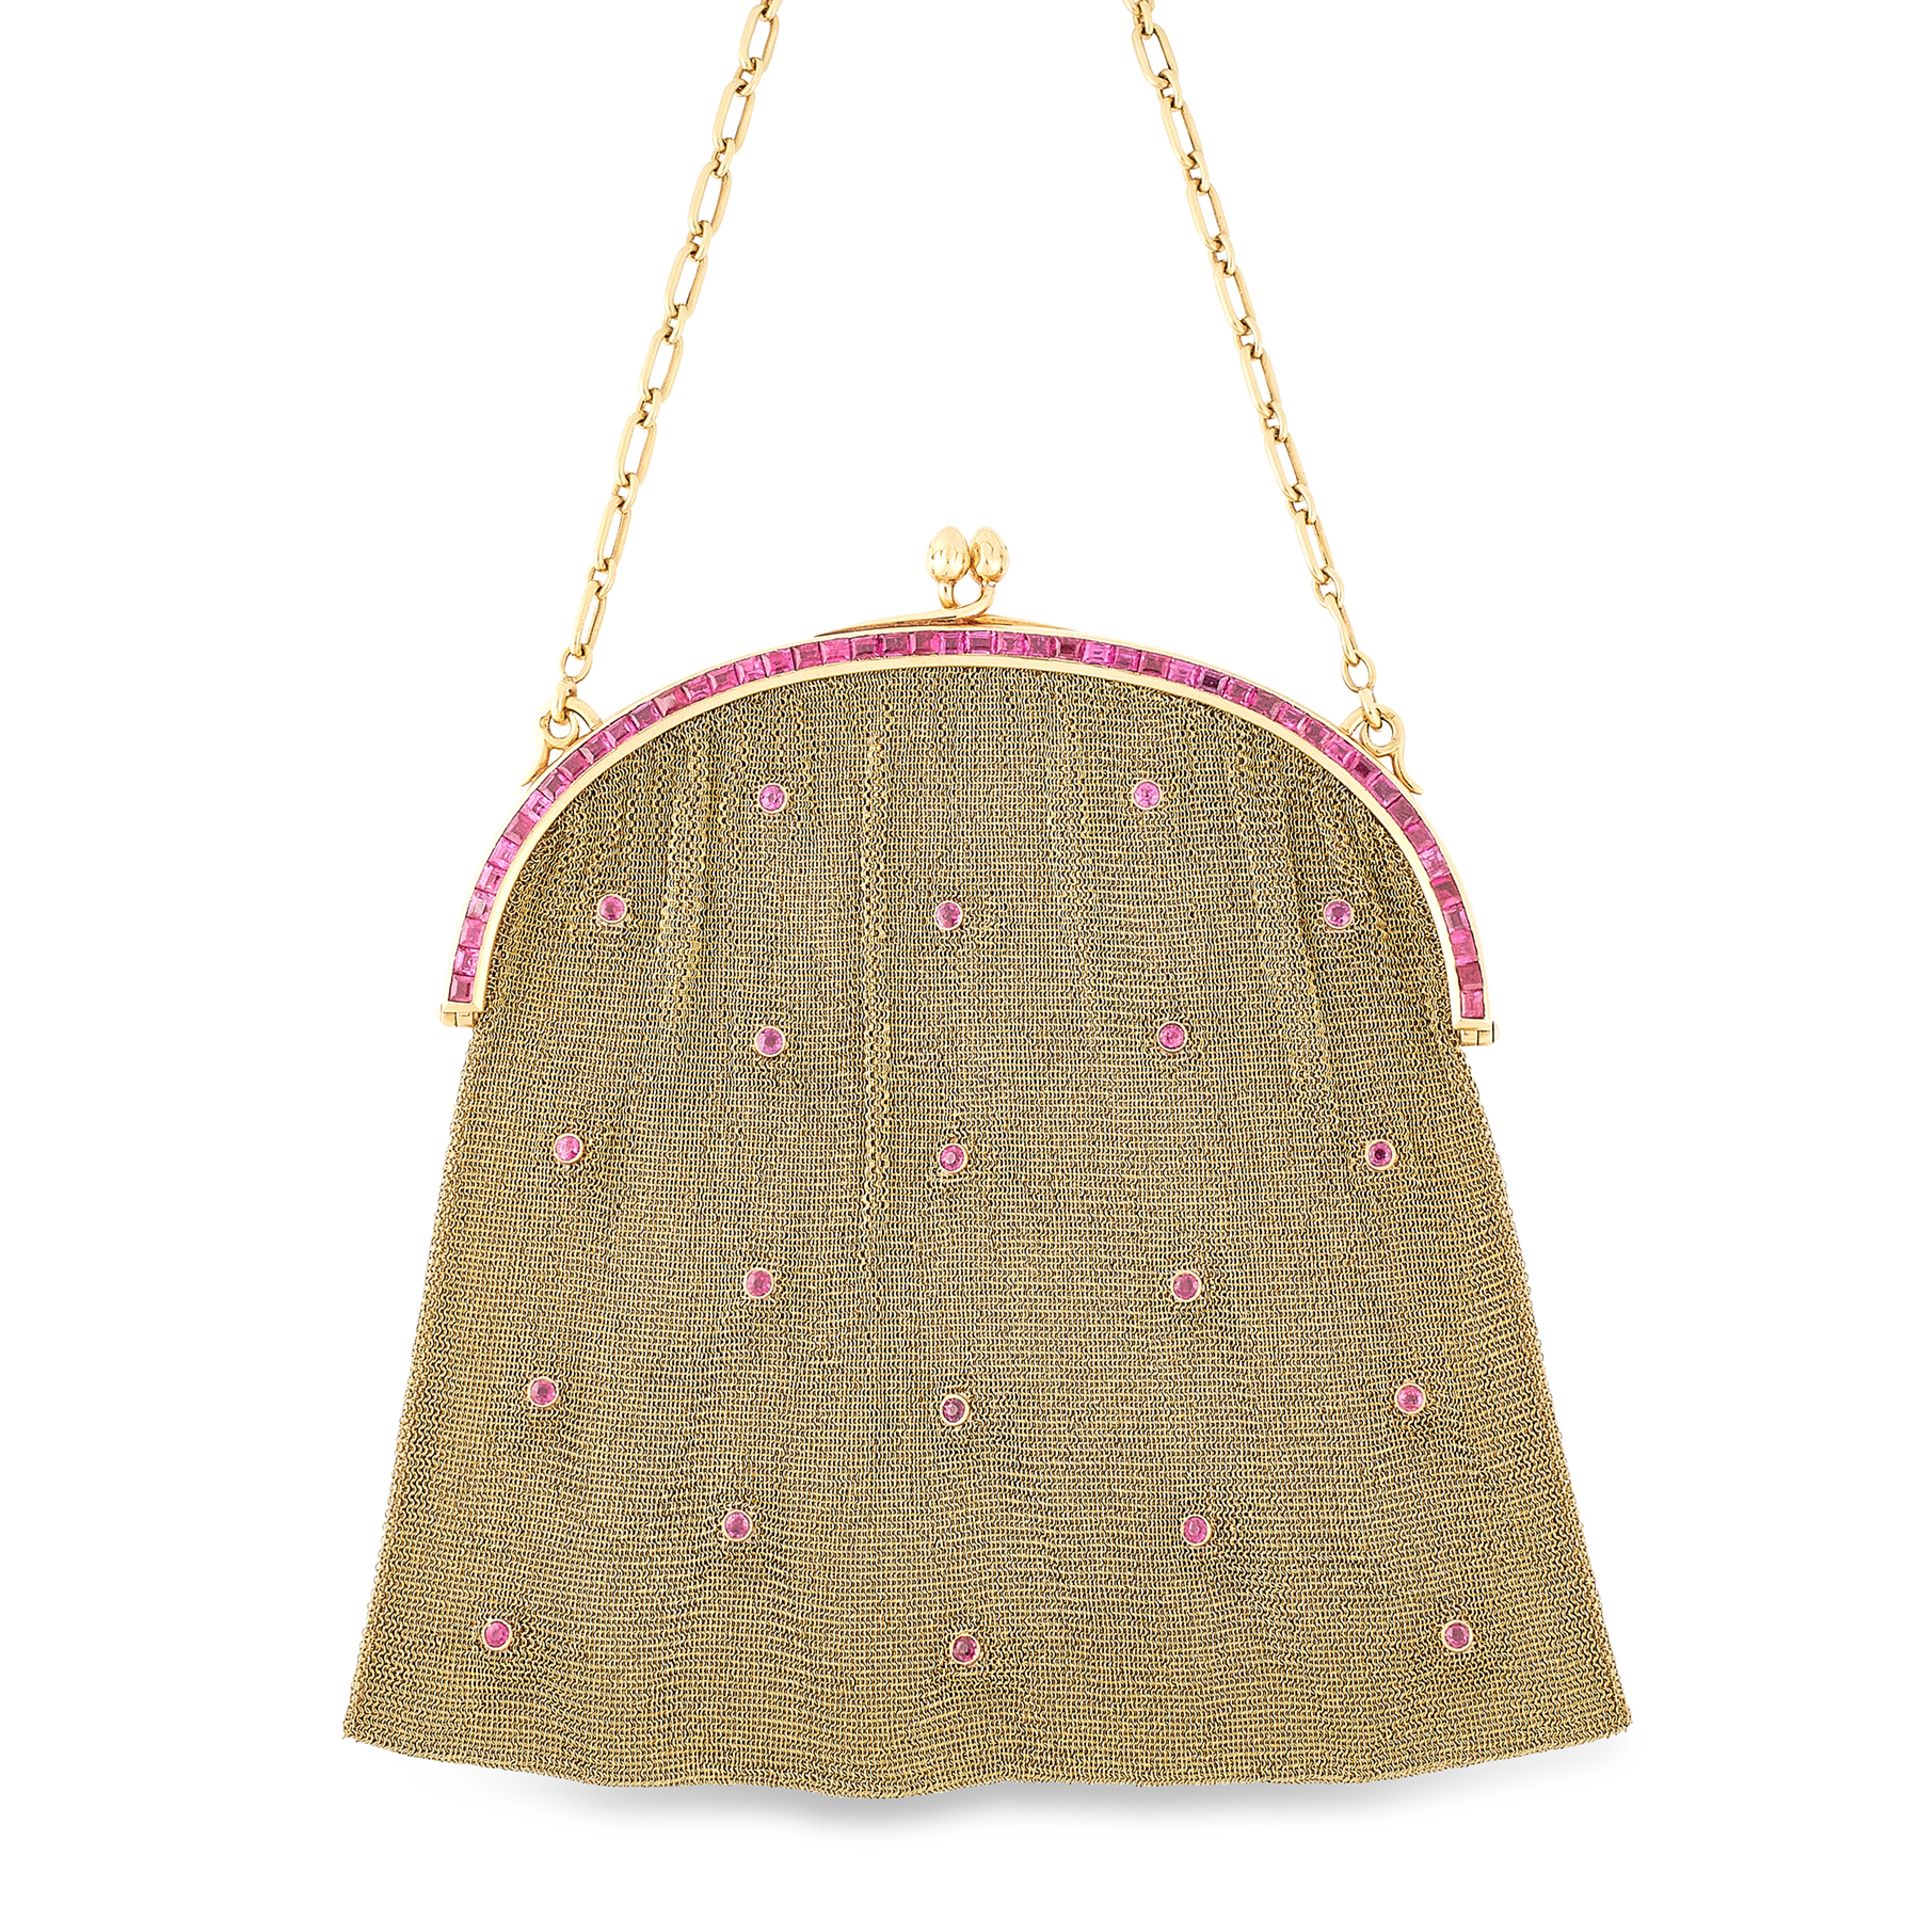 A VINTAGE BURMA NO HEAT RUBY EVENING BAG / PURSE in 18ct yellow gold, the mesh bag jewelled with